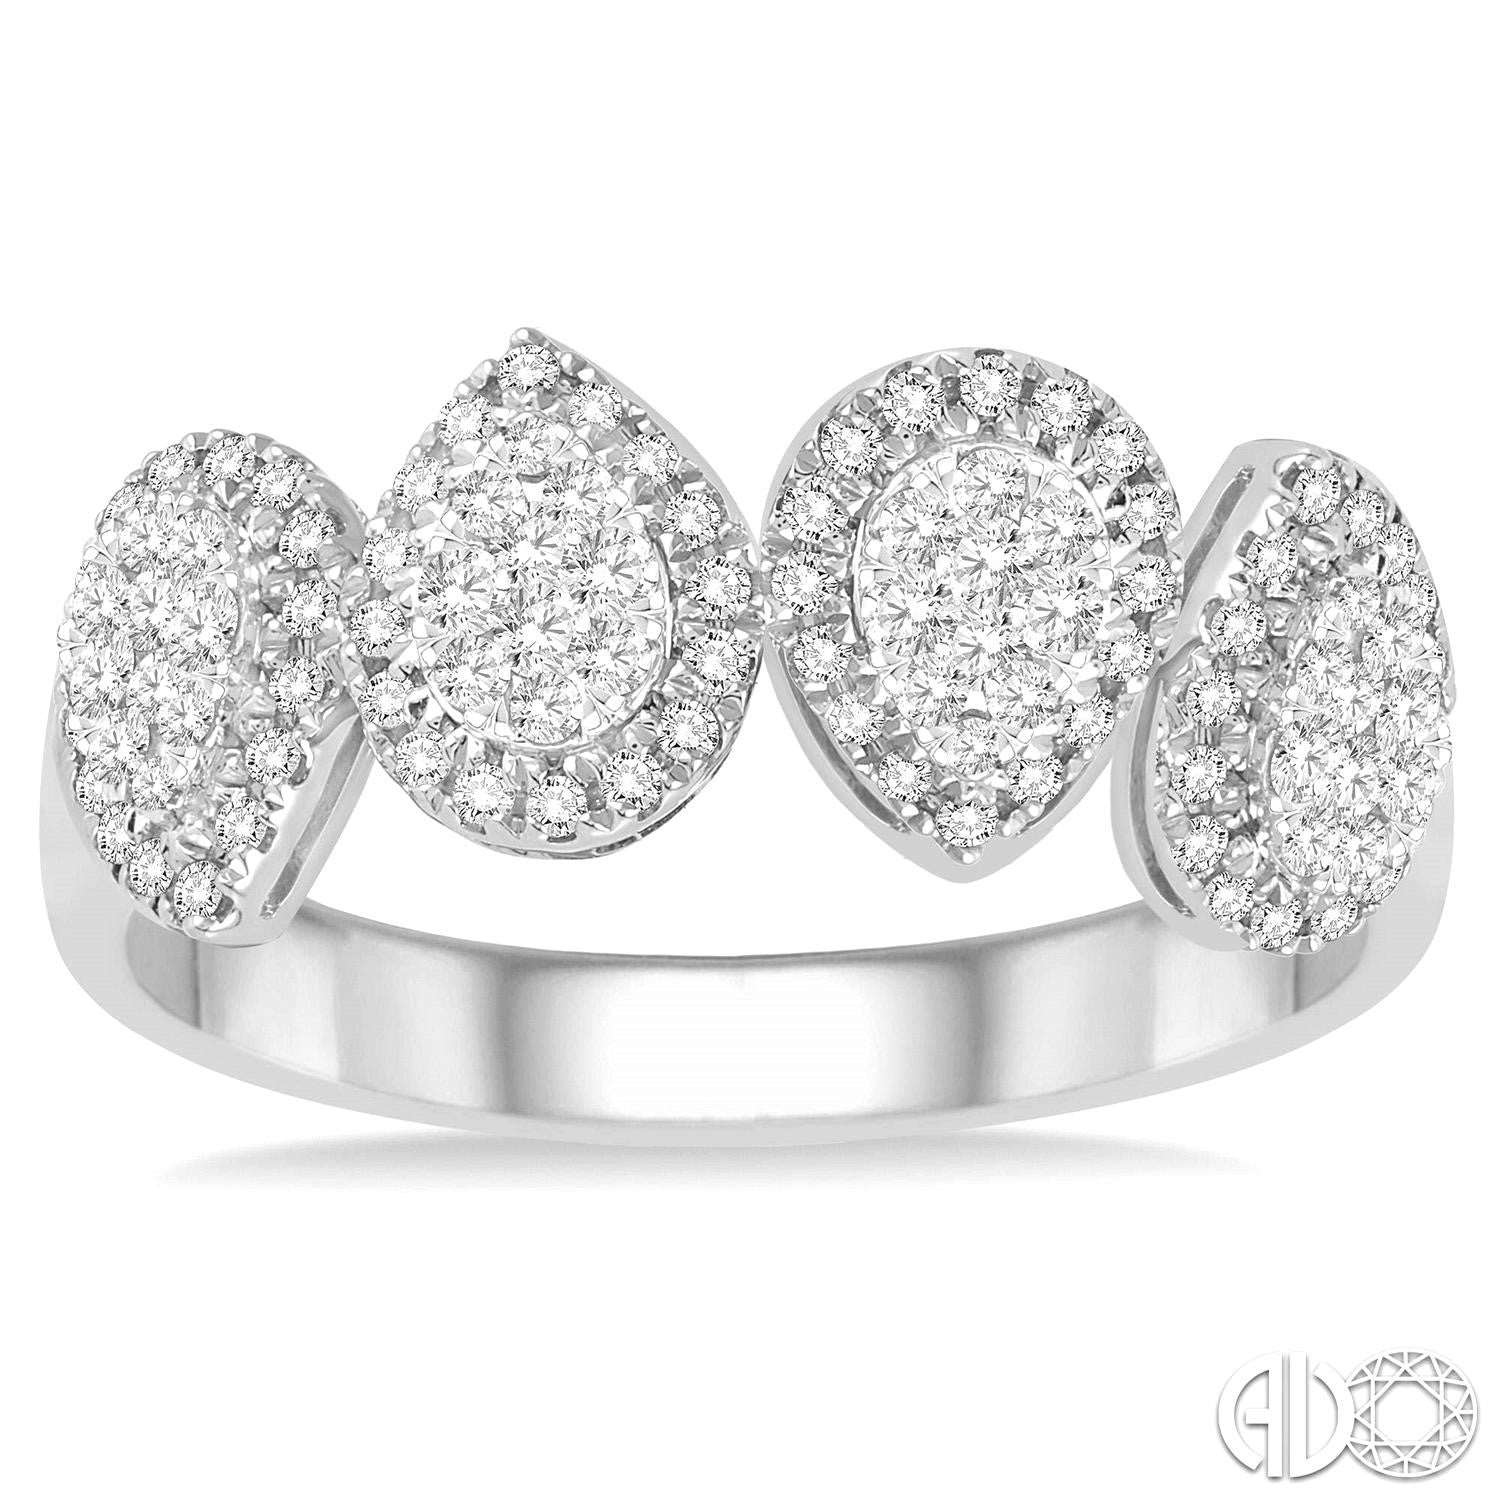 14K White Gold 4 Pear Shaped Diamond Cluster Band